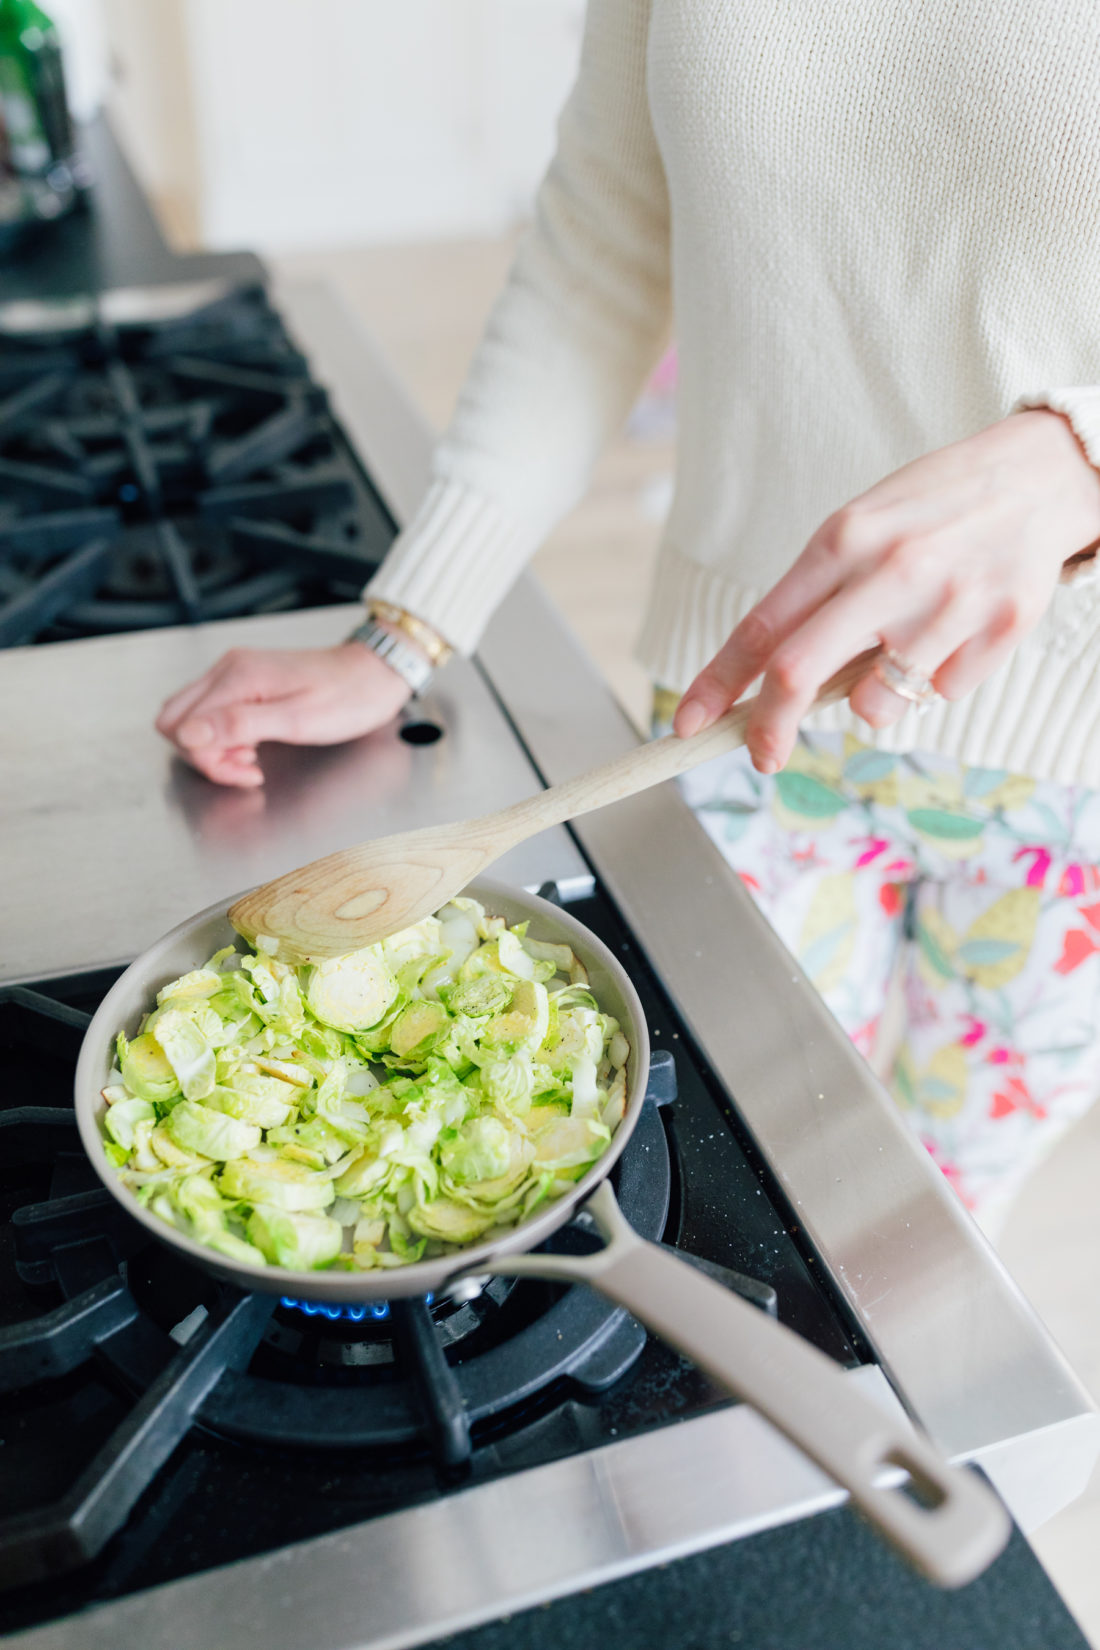 Eva Amurri Martino preps her Brussels Sprouts side dish in her kitchen in Connecticut